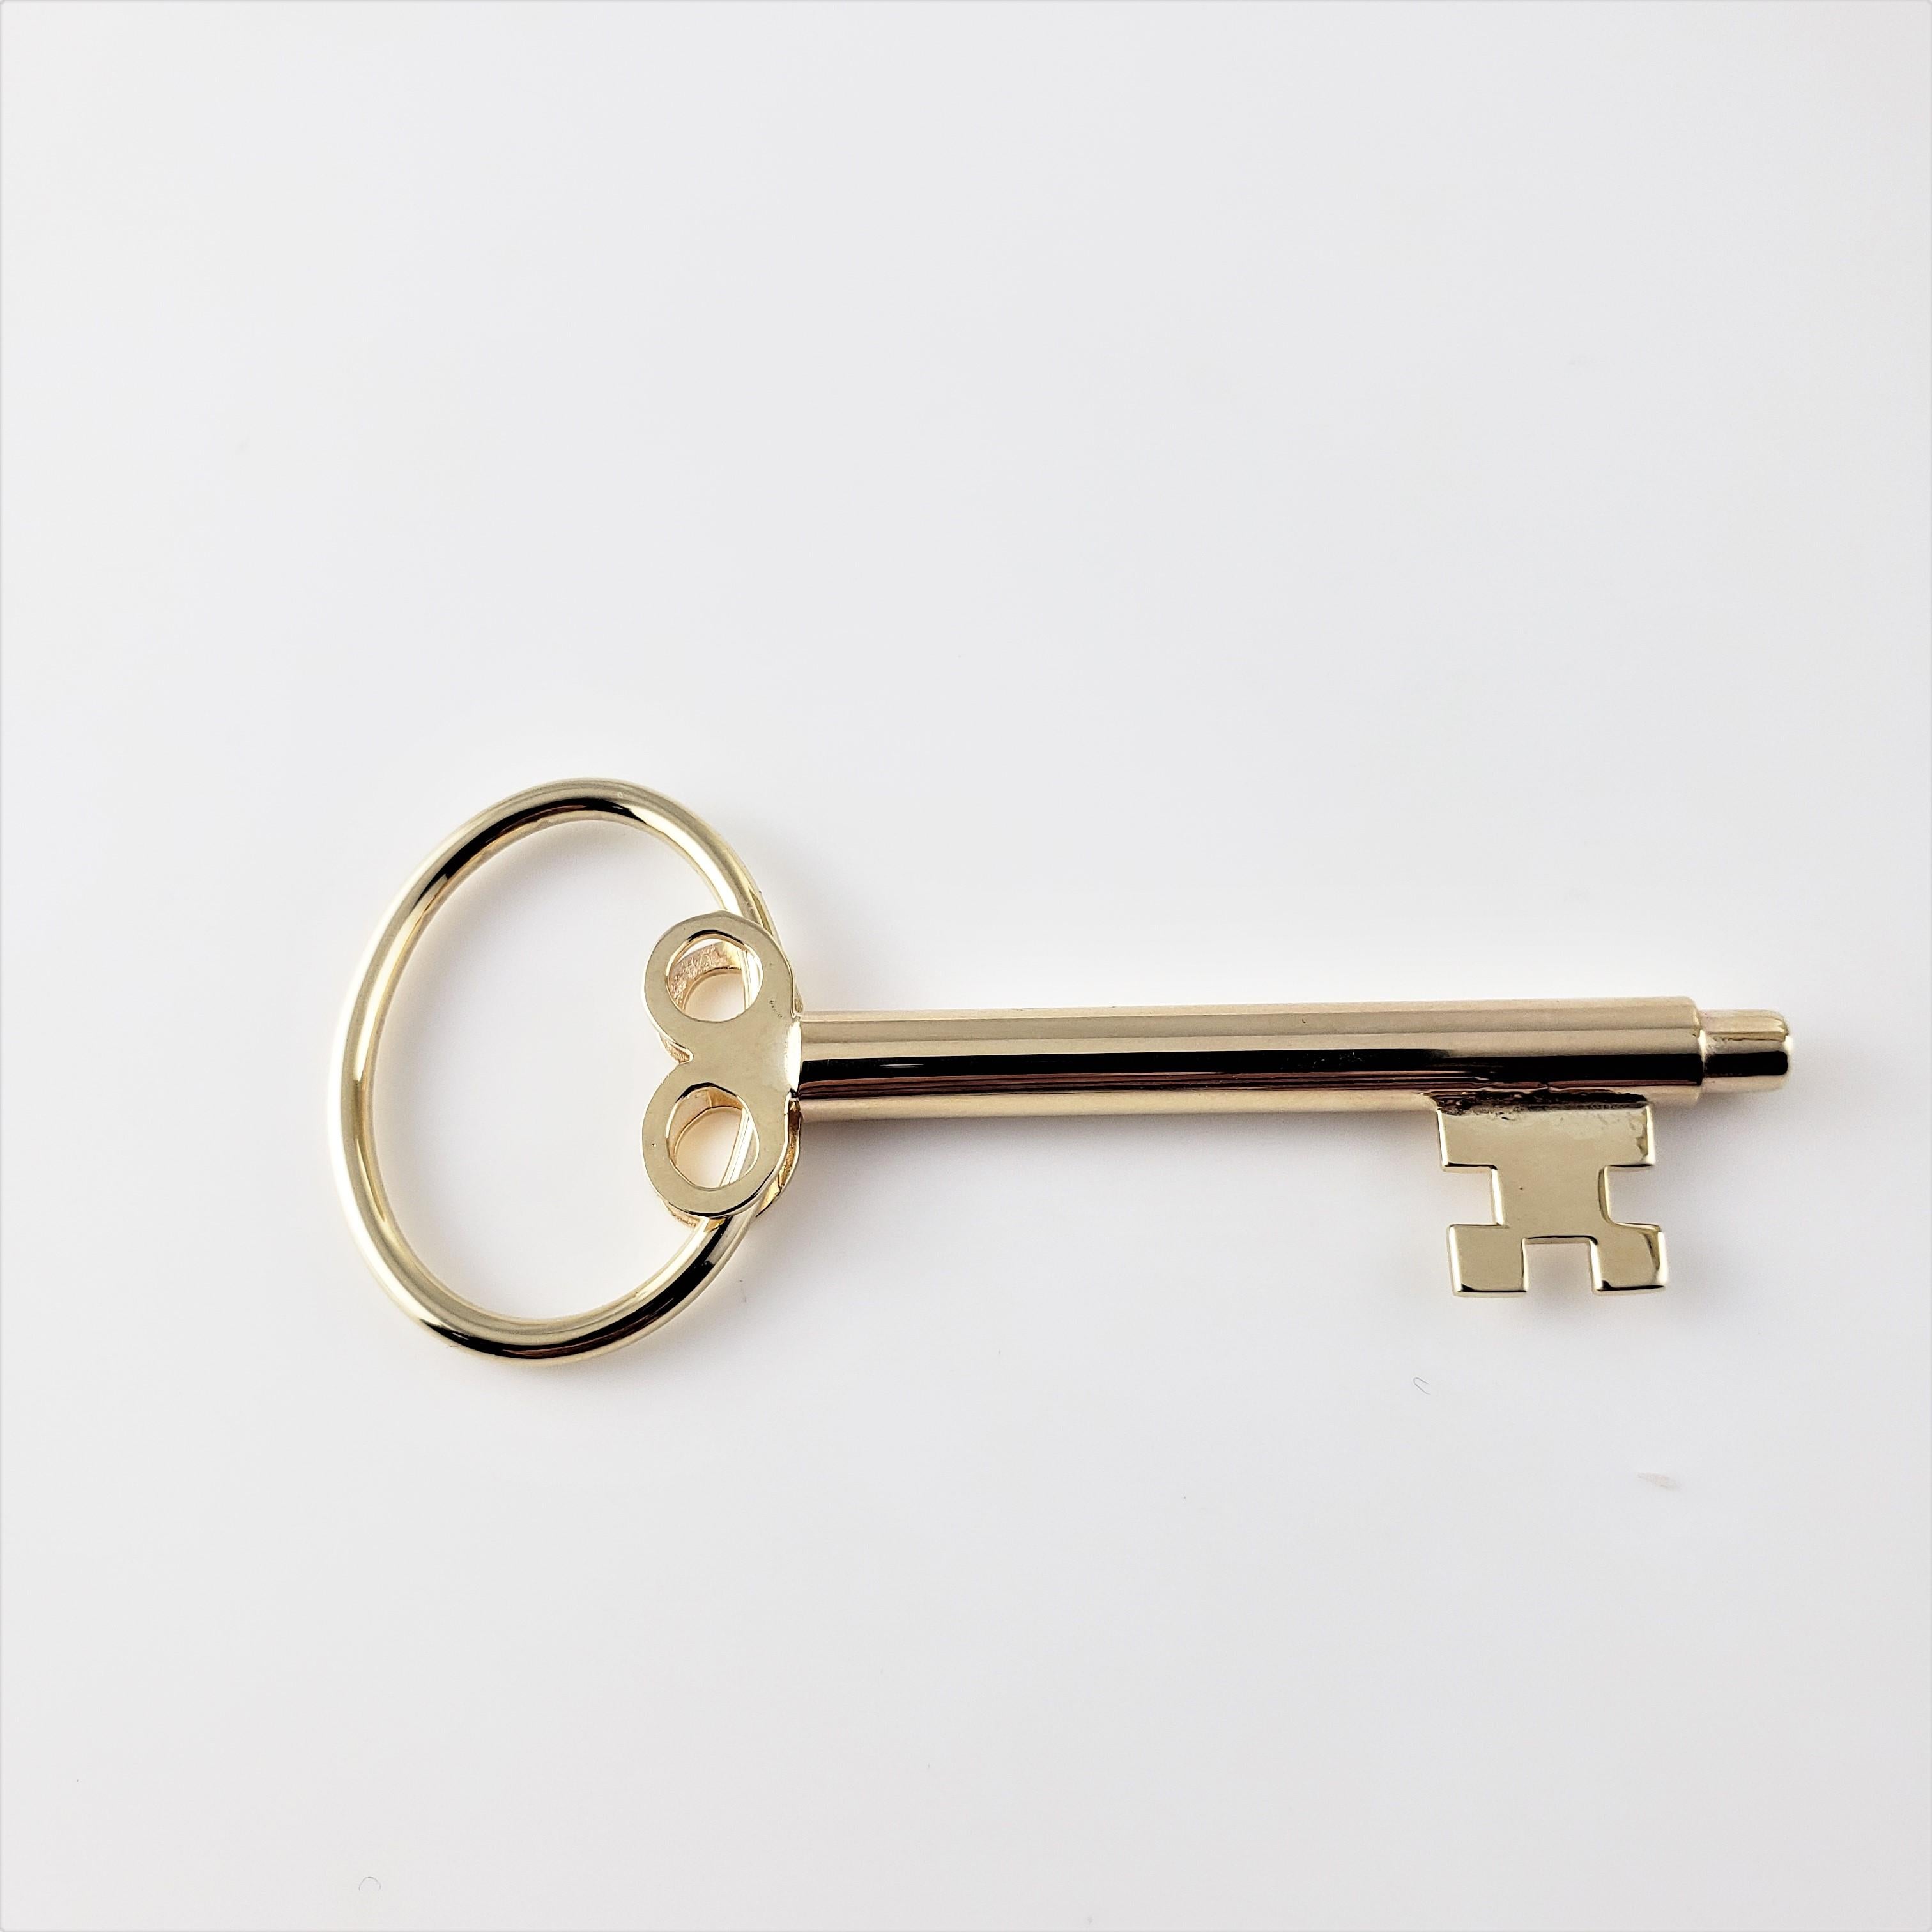 Vintage 14 Karat Yellow Gold Skeleton Key Key Ring-

This elegant skeleton key slides open to hold your keys; crafted in beautifully detailed 14K yellow gold.

Size: 2.5 inches x 1 inch

Weight: 6.5 dwt. / 10.2 gr.

Stamped: 14K

Very good